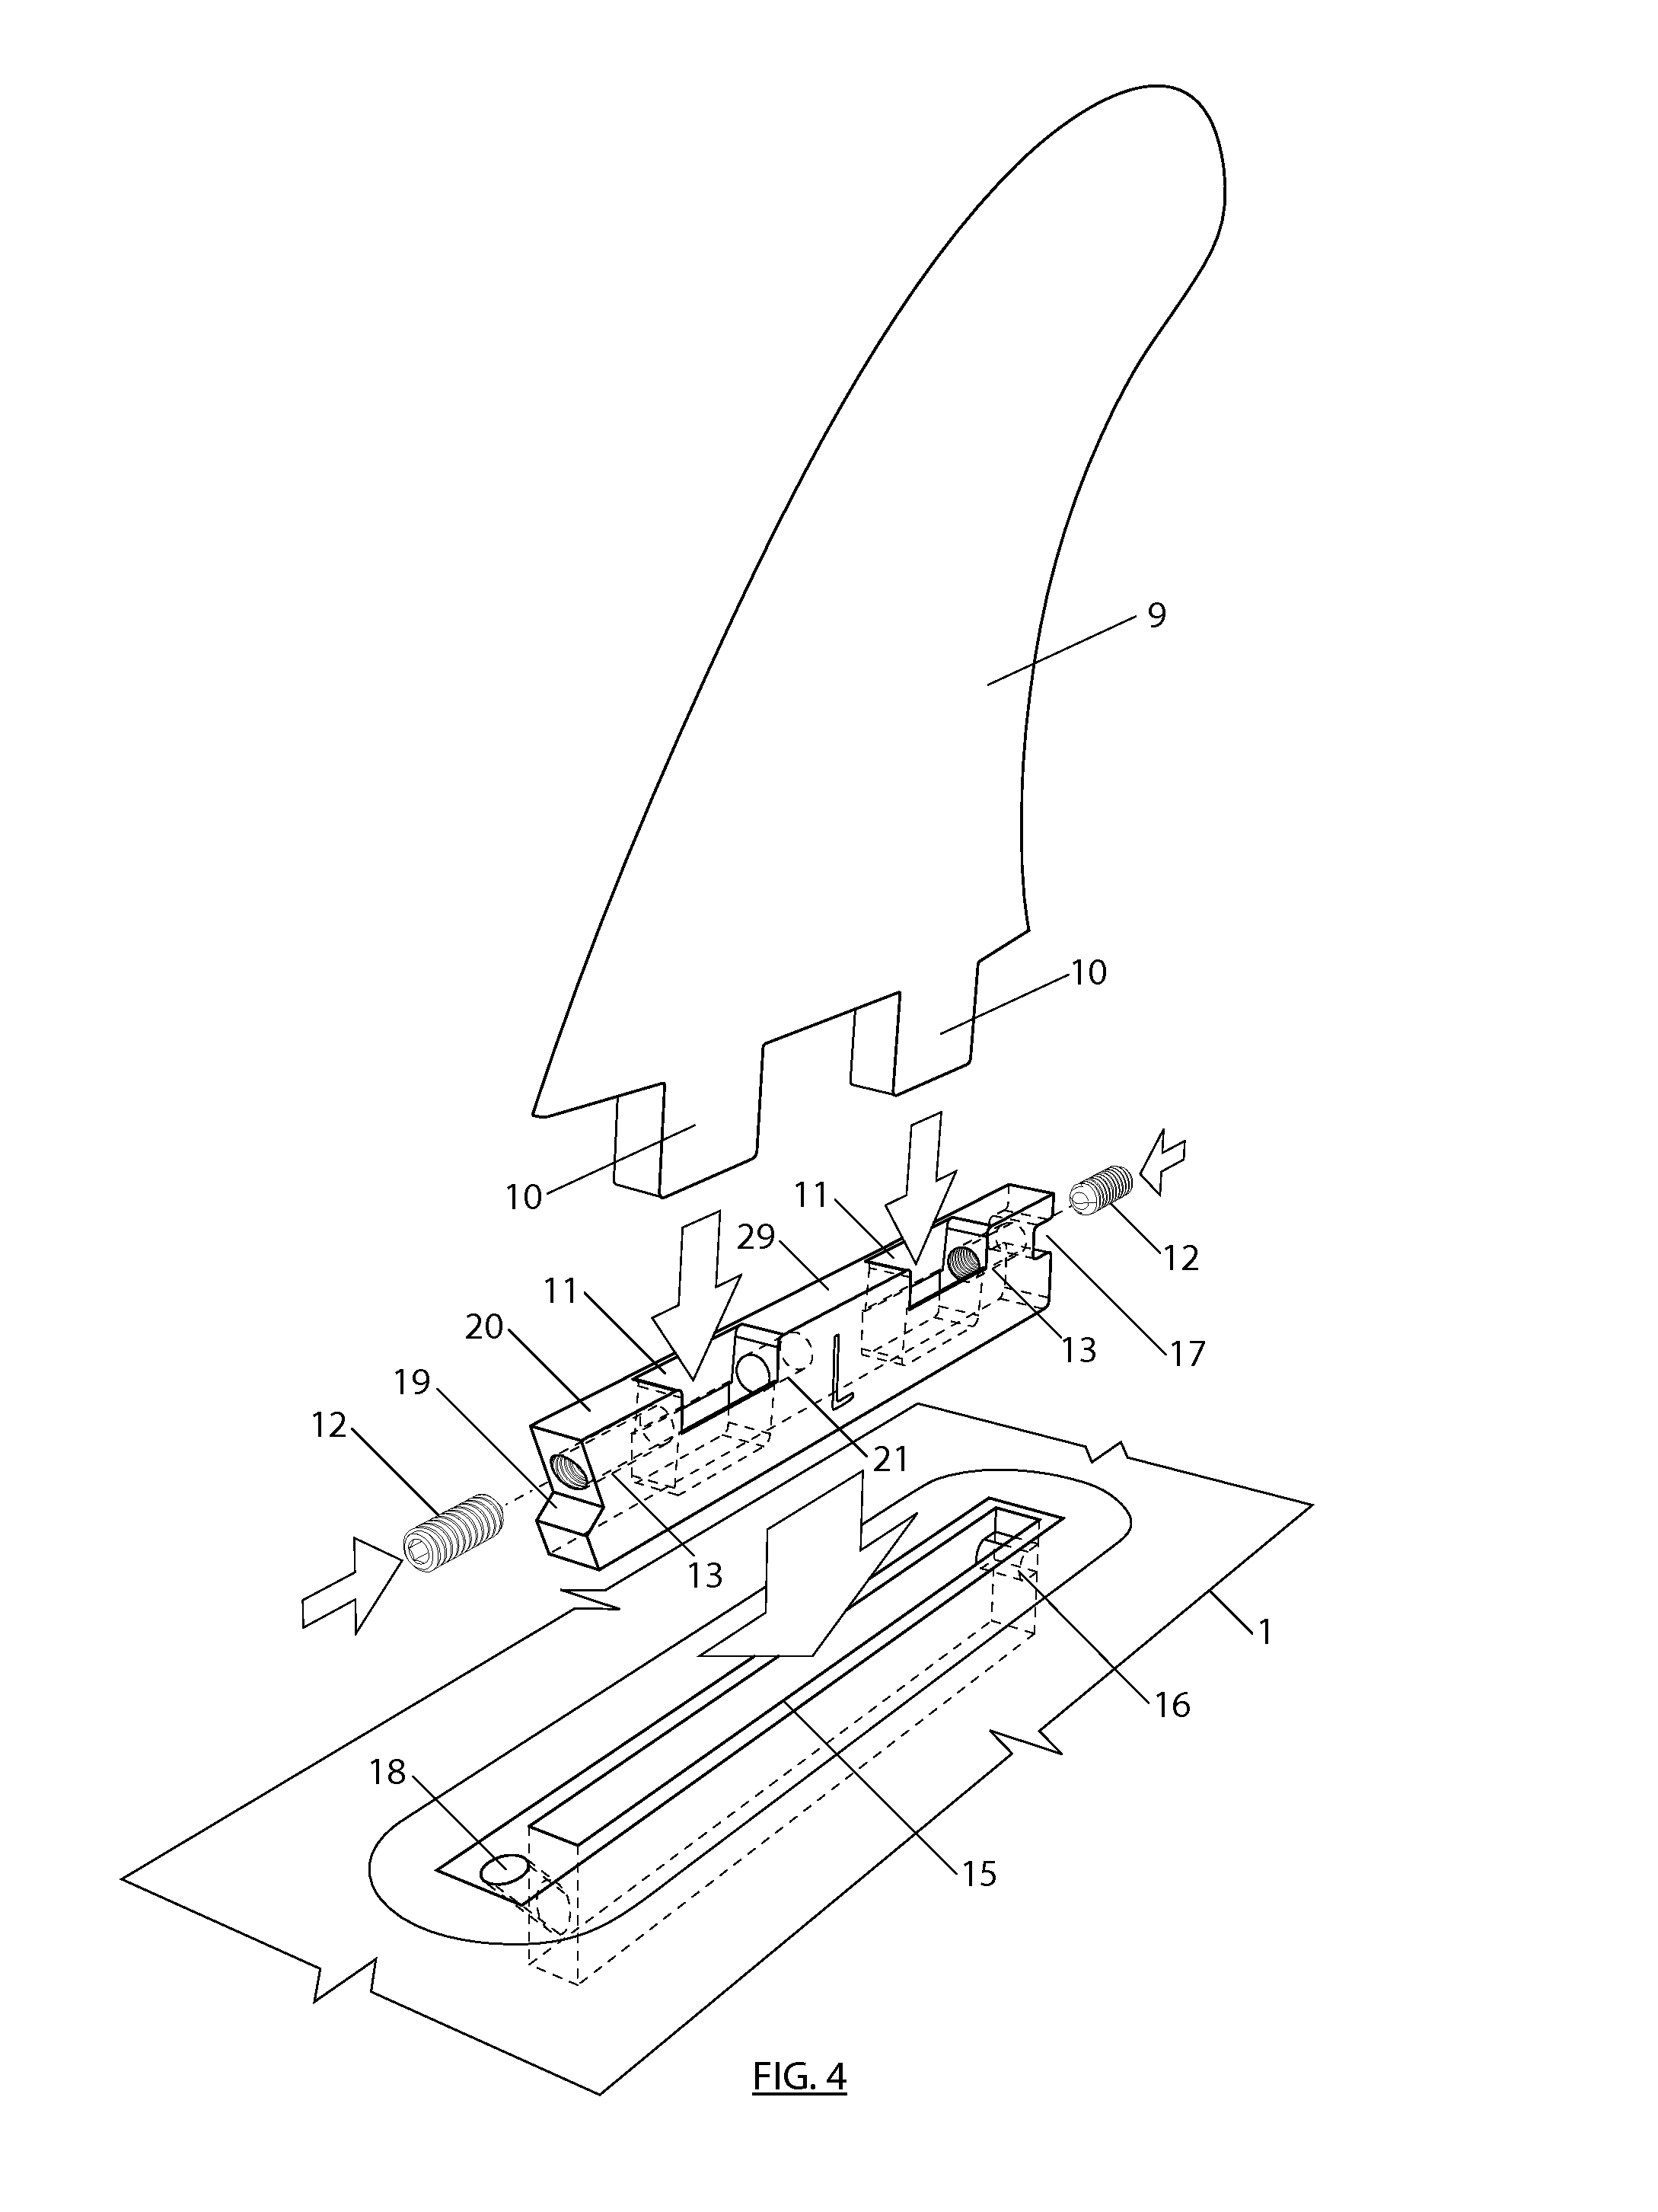 Adapter for the Insert of Two-Tabbed Fins into Single-Tabbed Fin Boxes of a Surfboard